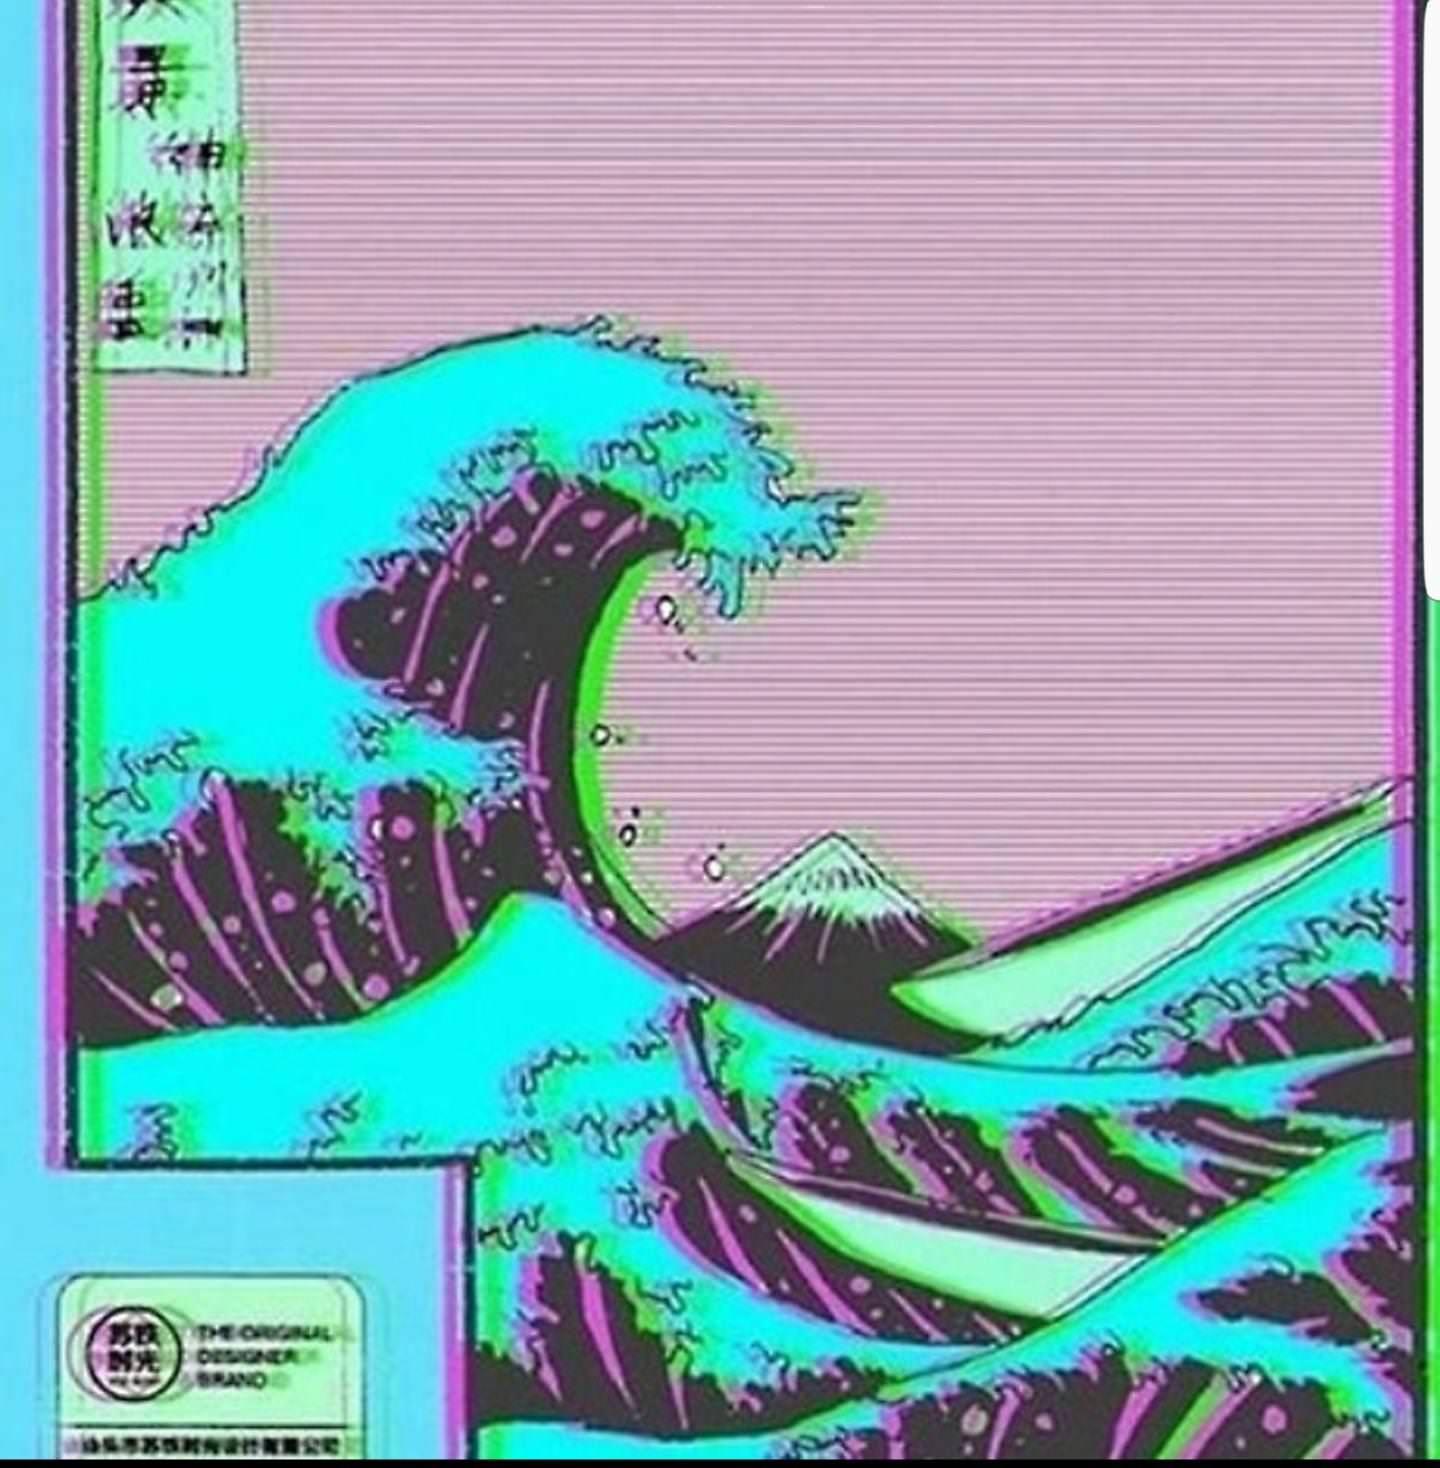 The cover of a book with an image on it - The Great Wave off Kanagawa, glitch